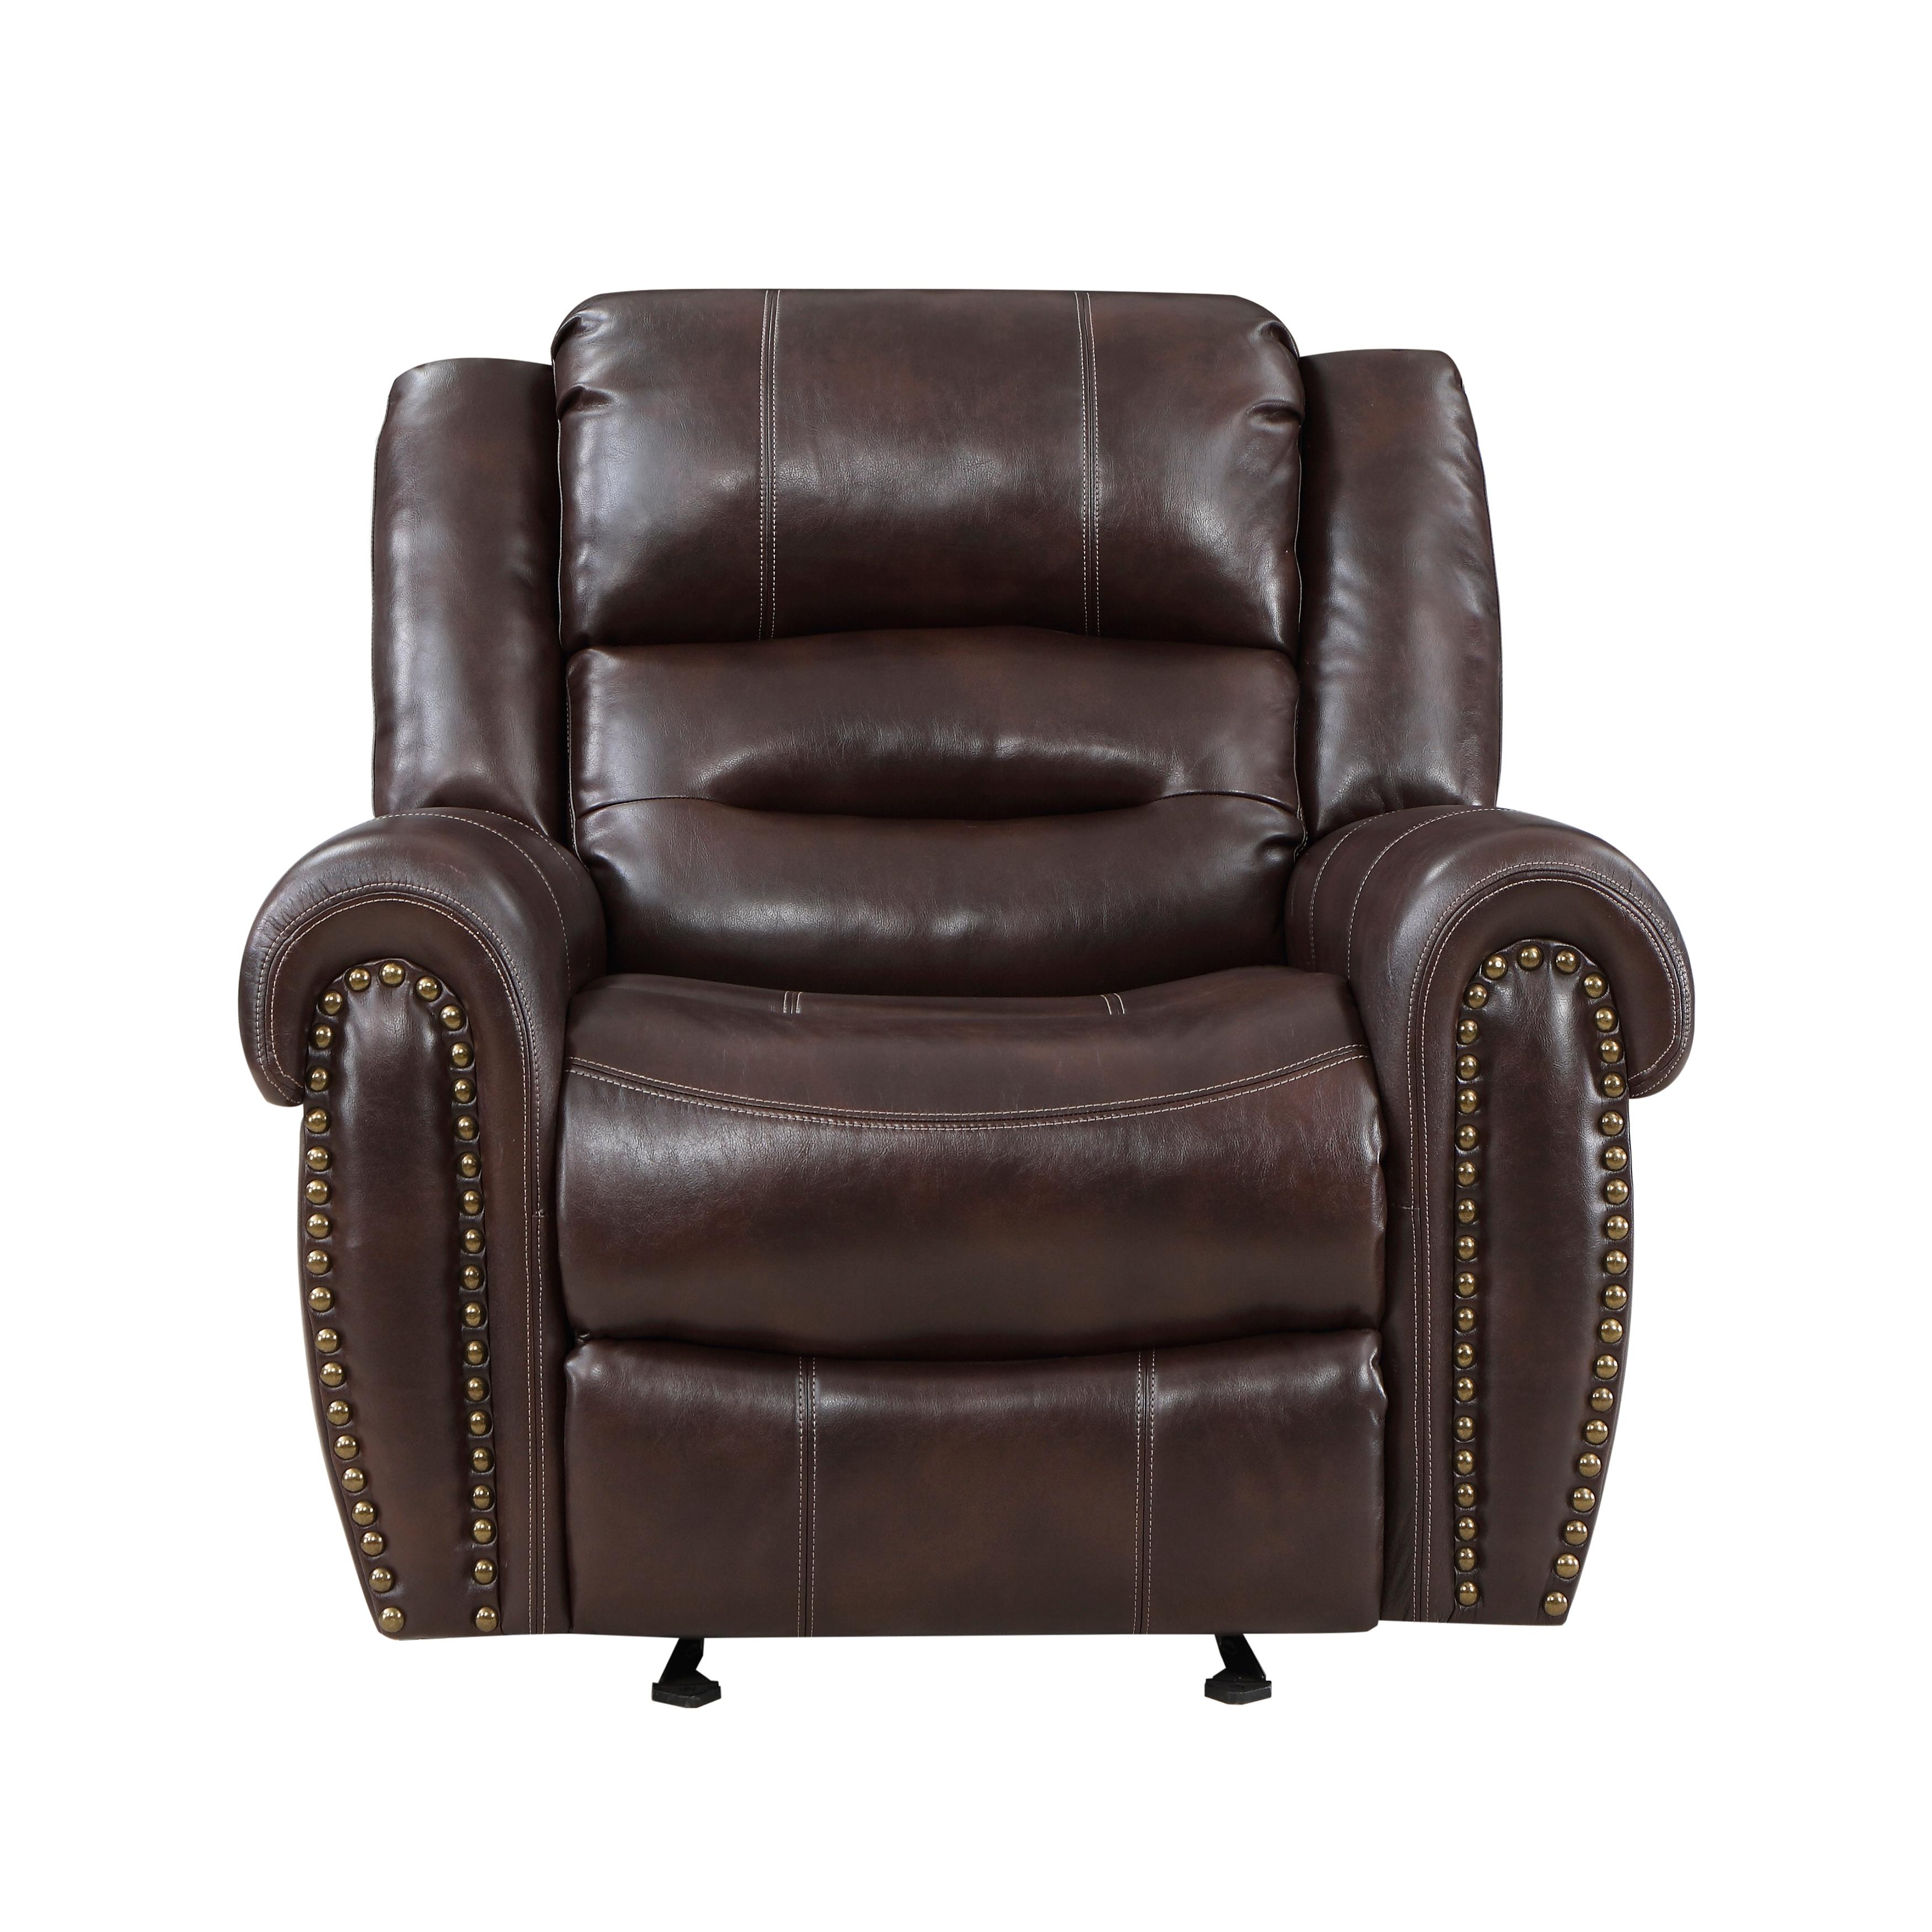 Traditional Reclining Chair 9668NBR-1 Center Hill 9668NBR-1 in Brown Faux Leather